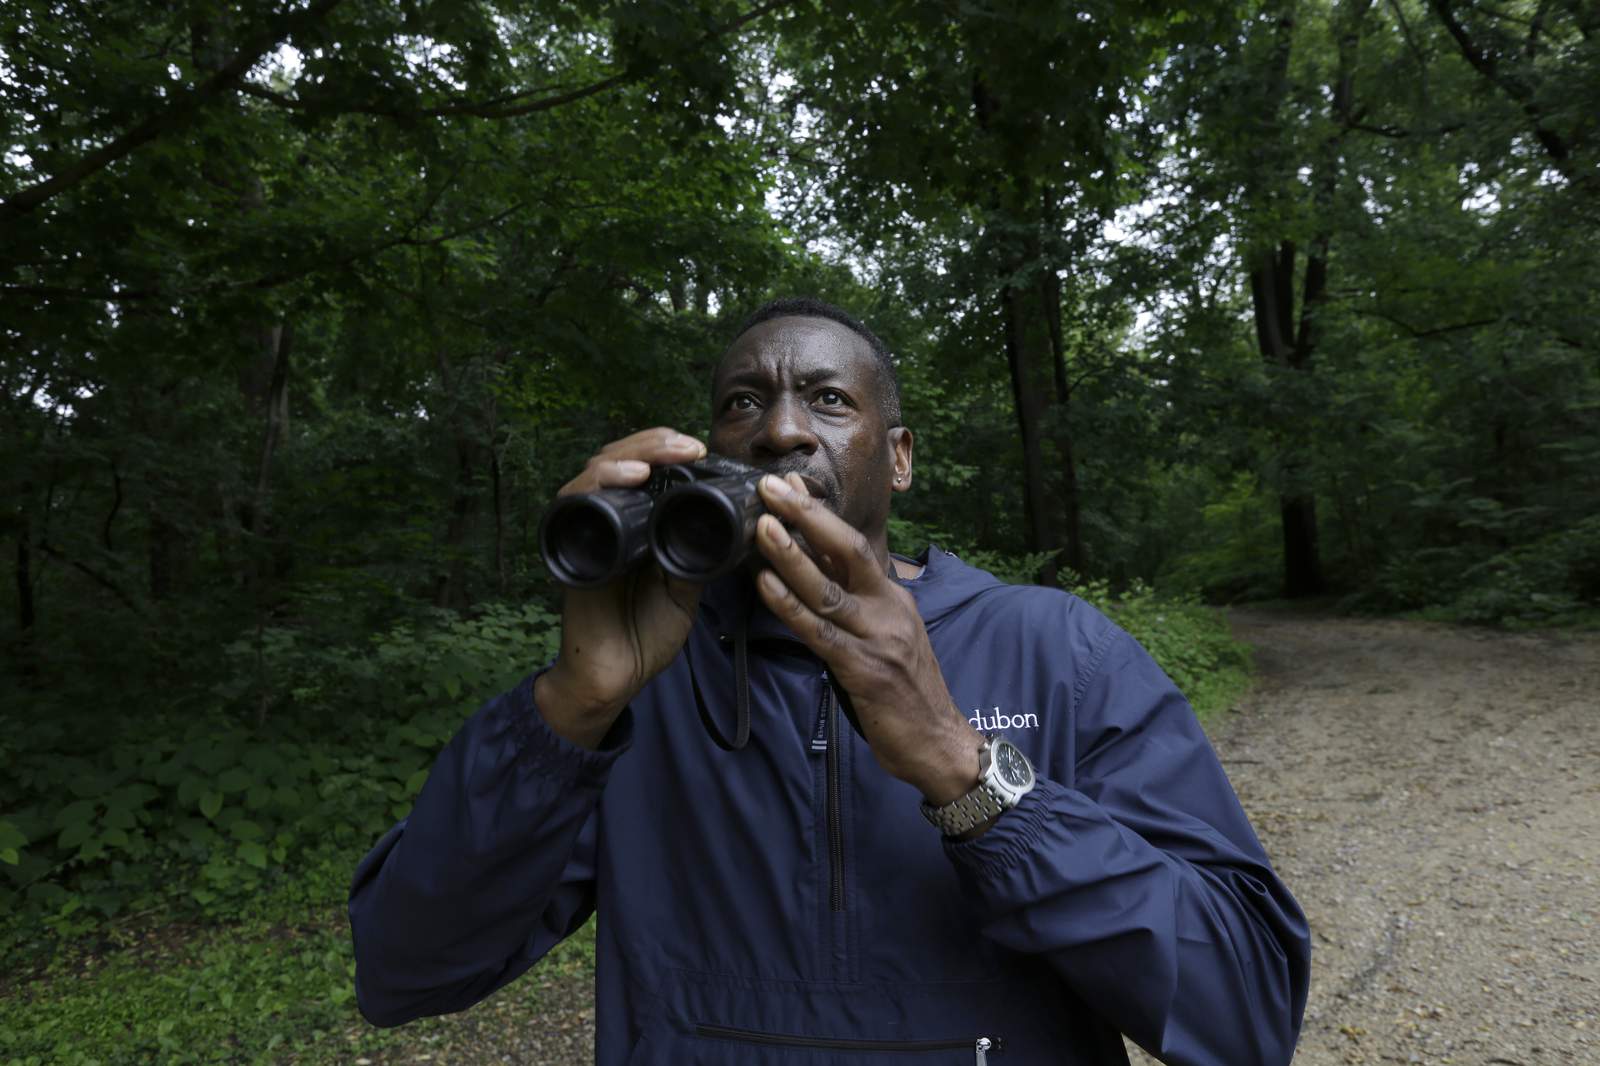 Black bird watchers draw attention to racial issues outdoors